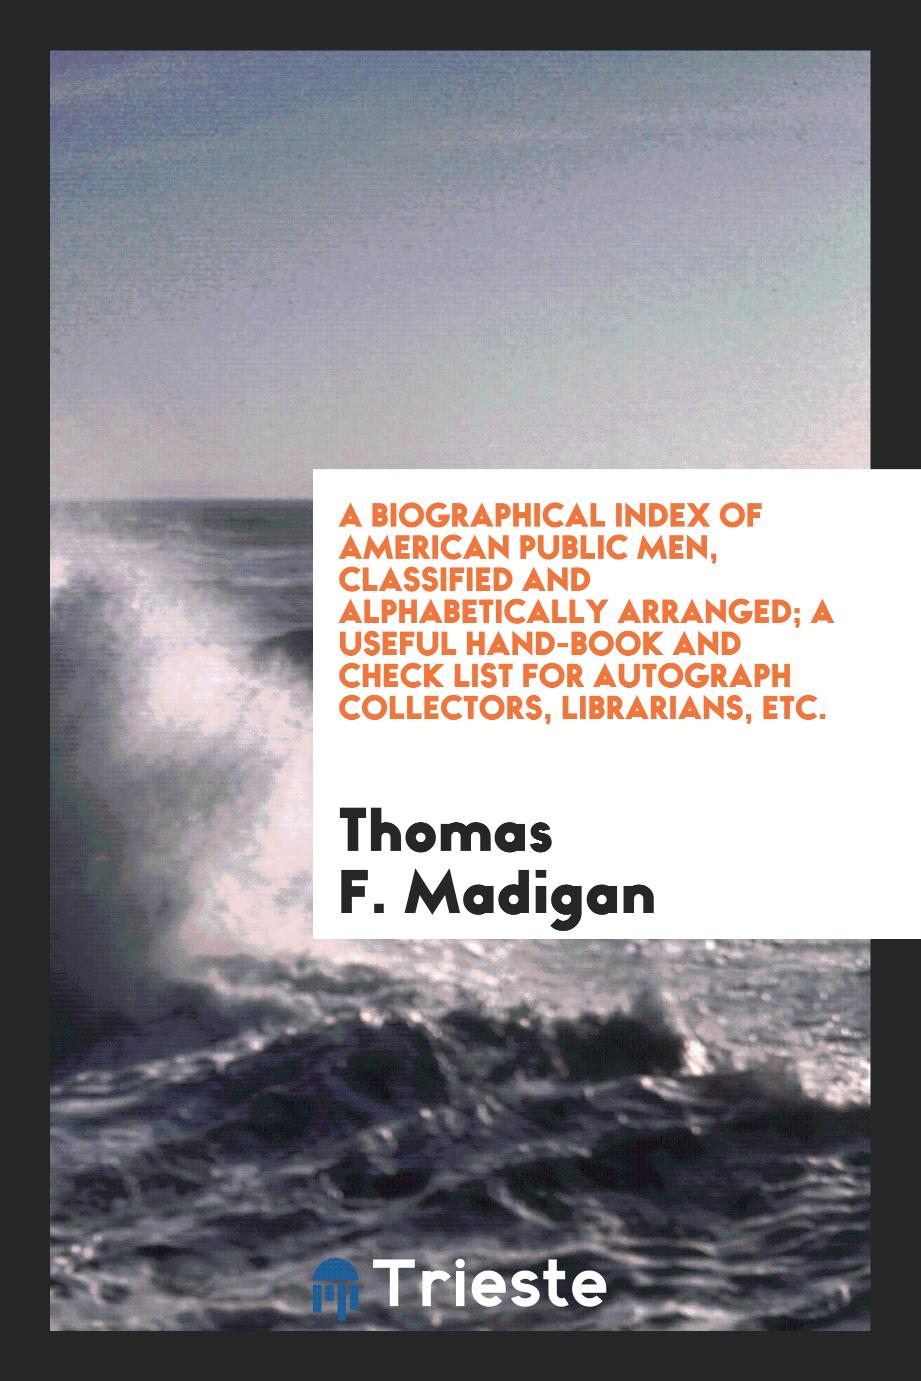 A biographical index of American public men, classified and alphabetically arranged; a useful hand-book and check list for autograph collectors, librarians, etc.